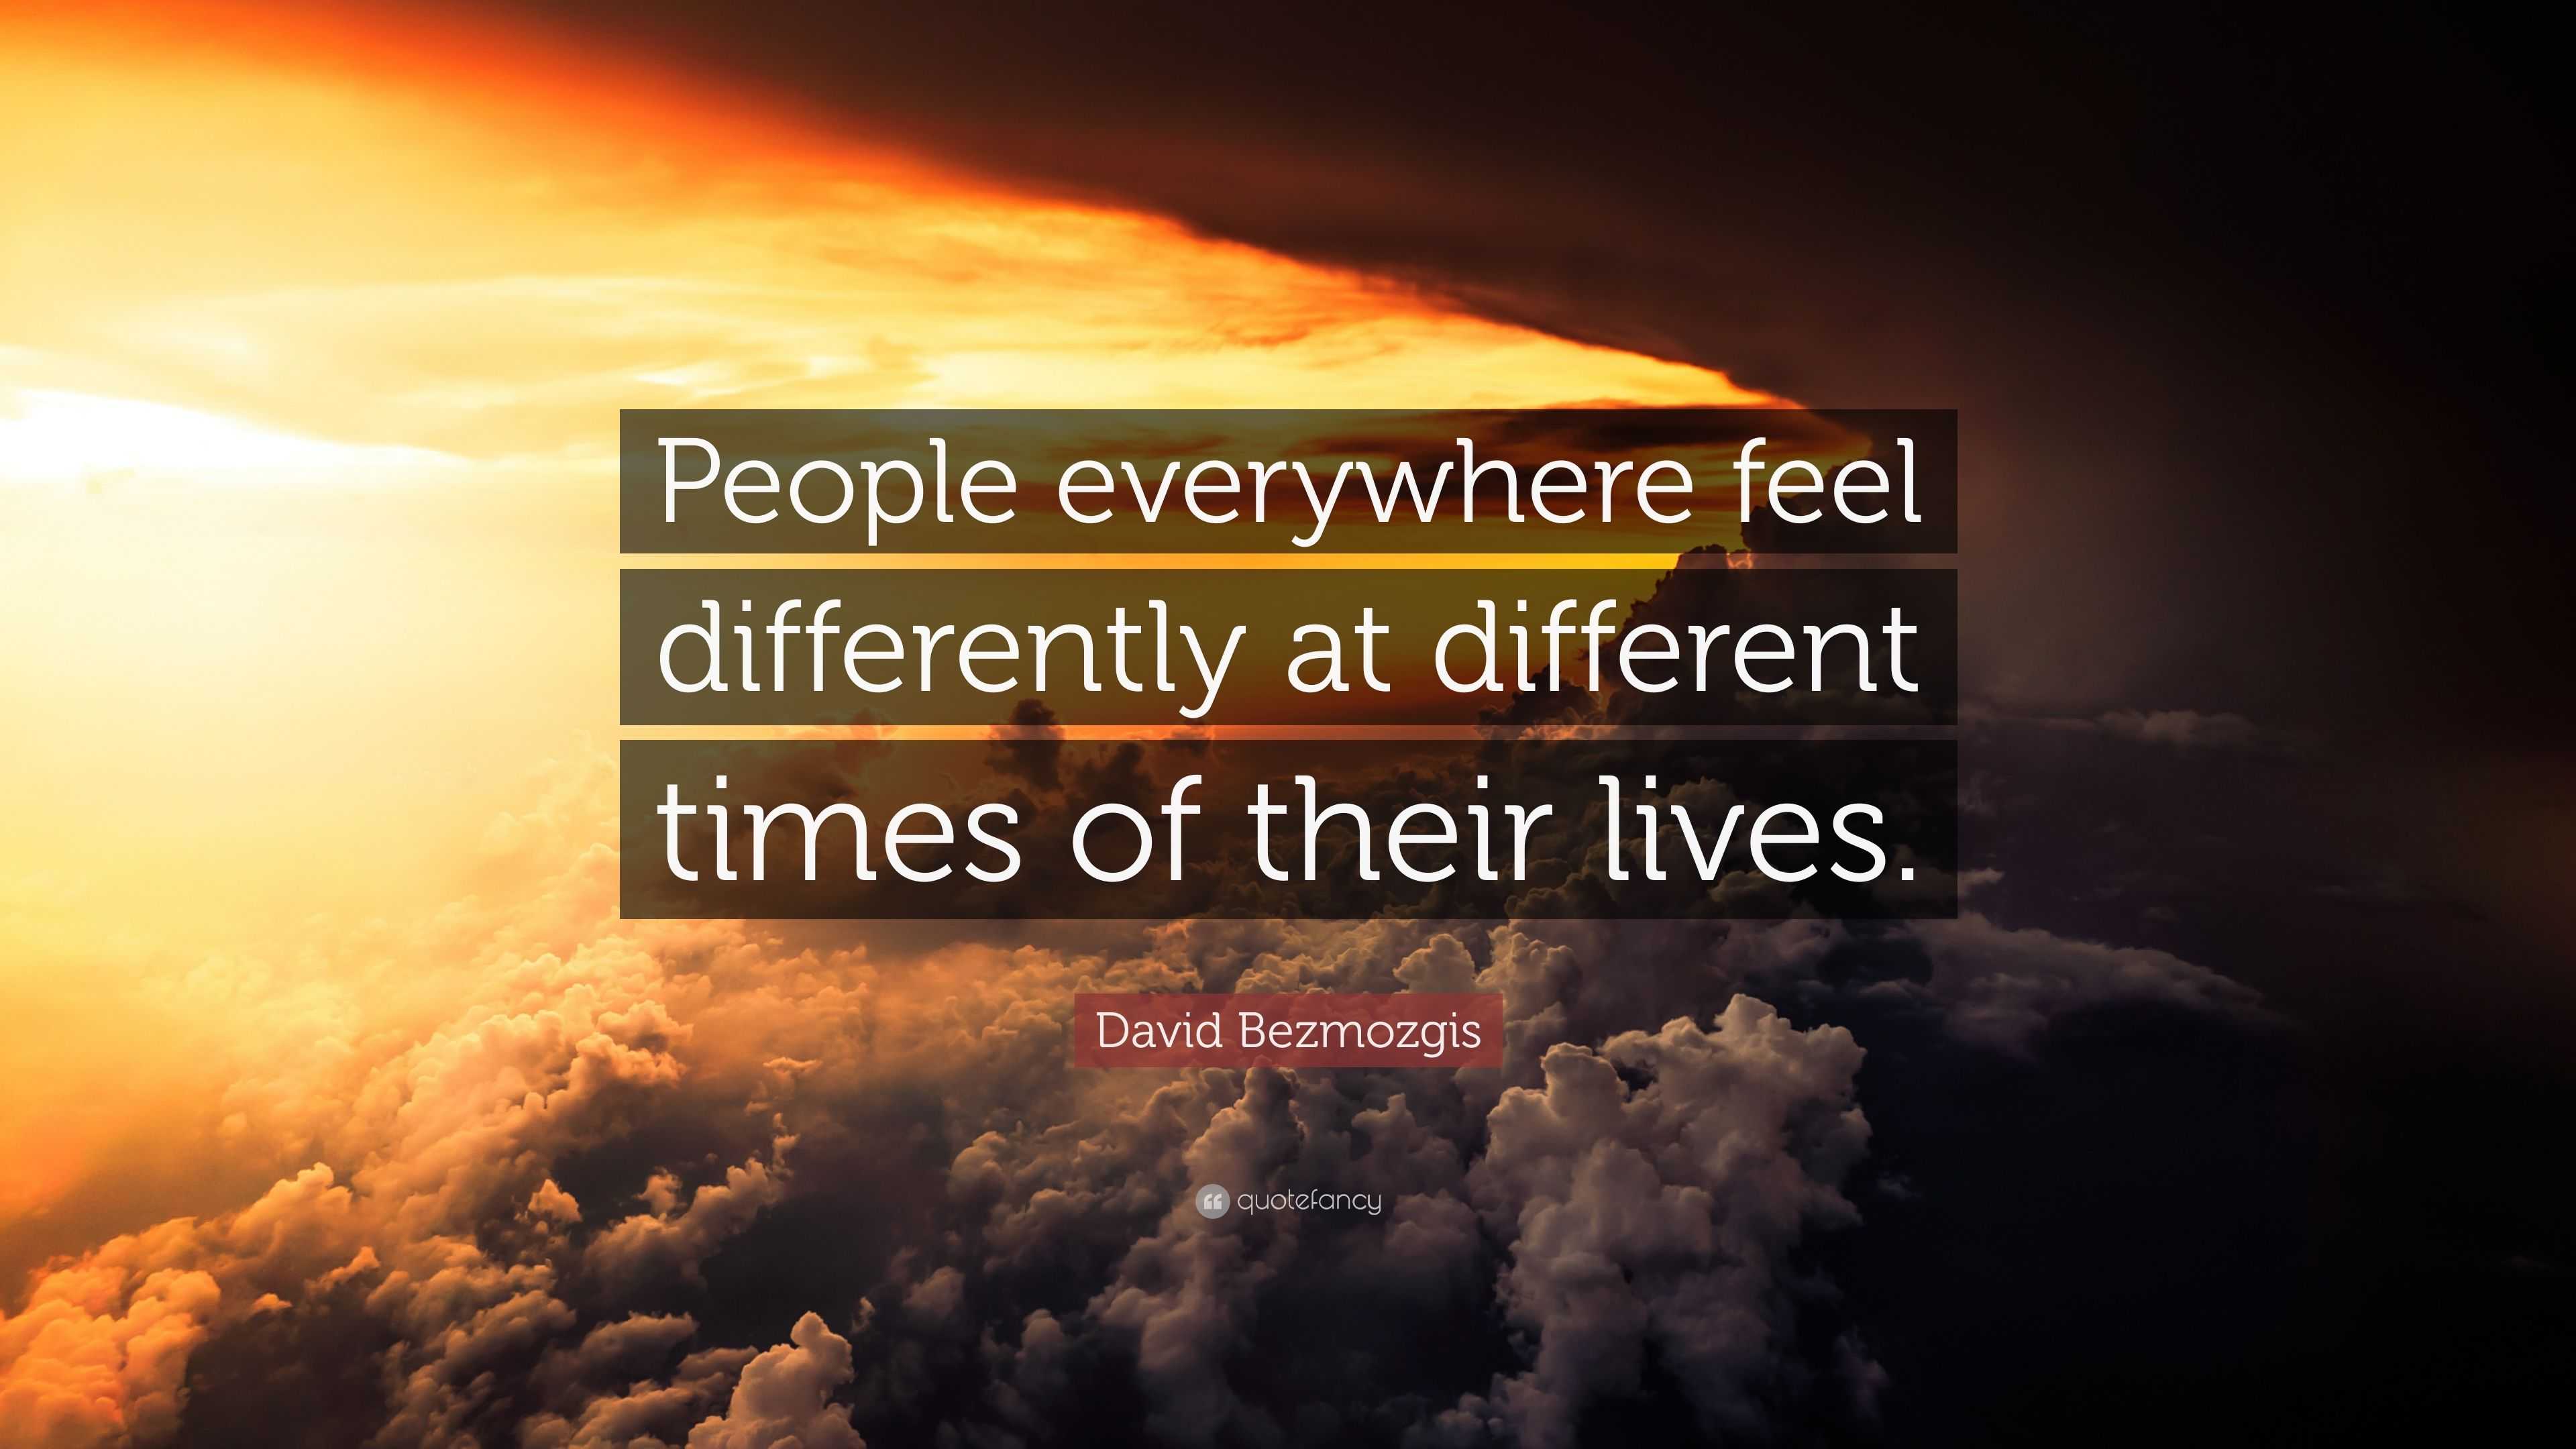 David Bezmozgis Quote: “People everywhere feel differently at different ...